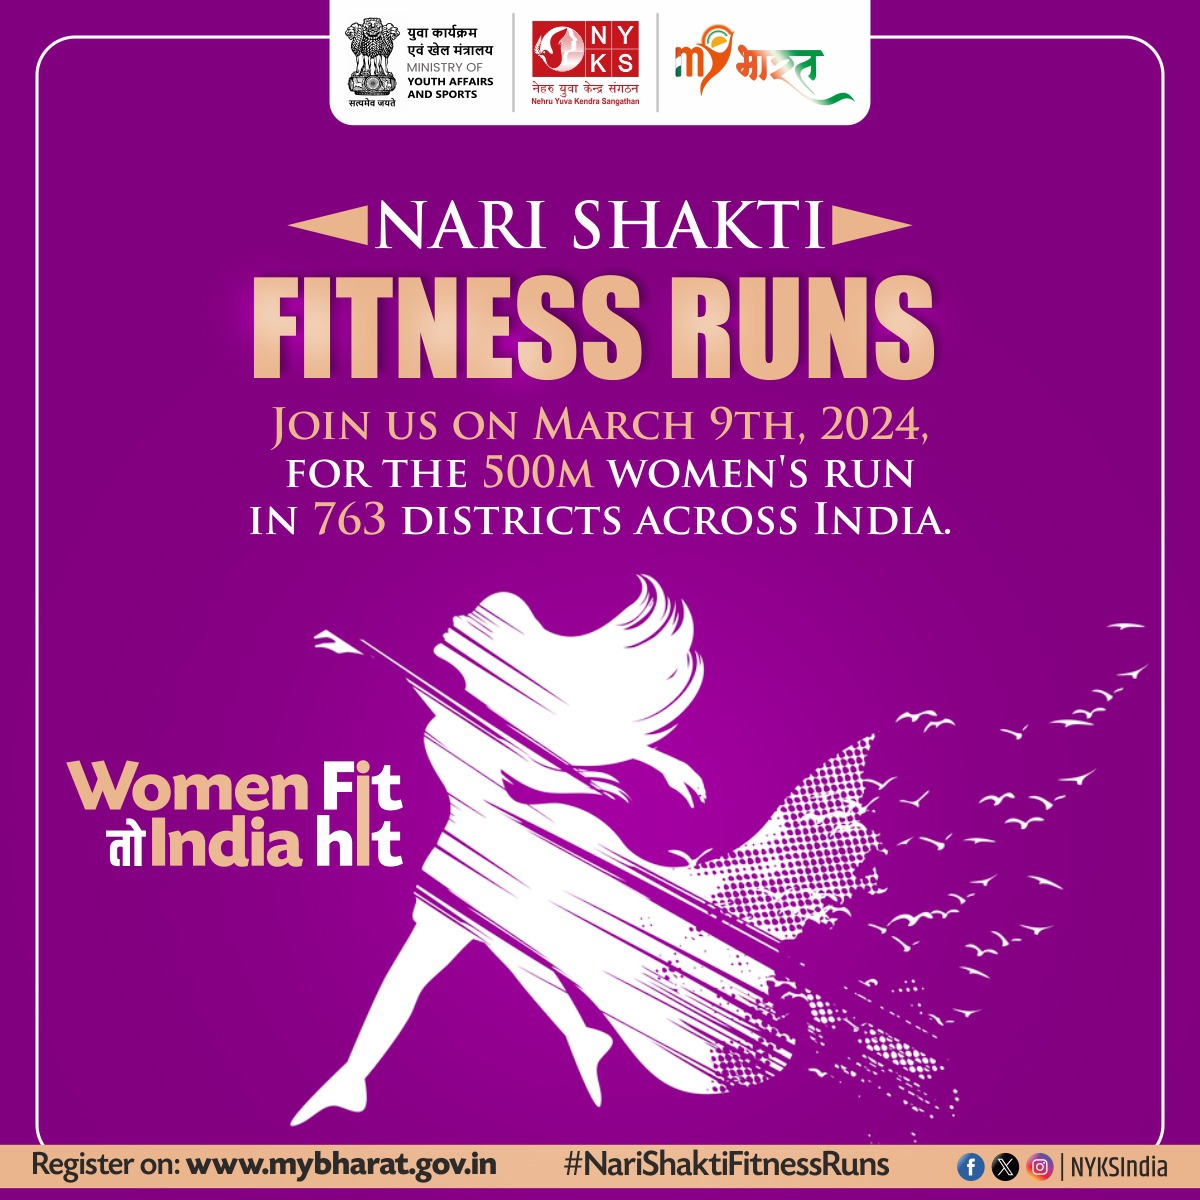 Calling all women to lace up and lead the way! 🏃‍♀️Join us on March 9th, 2024, for the #NariShaktiFitnessRuns, featuring a 500m run in 763 districts across India. Let's celebrate strength, unity, and empowerment together! 💪🇮🇳 #WomenEmpowerment #WomensDay #WomenFitतोIndiaHit